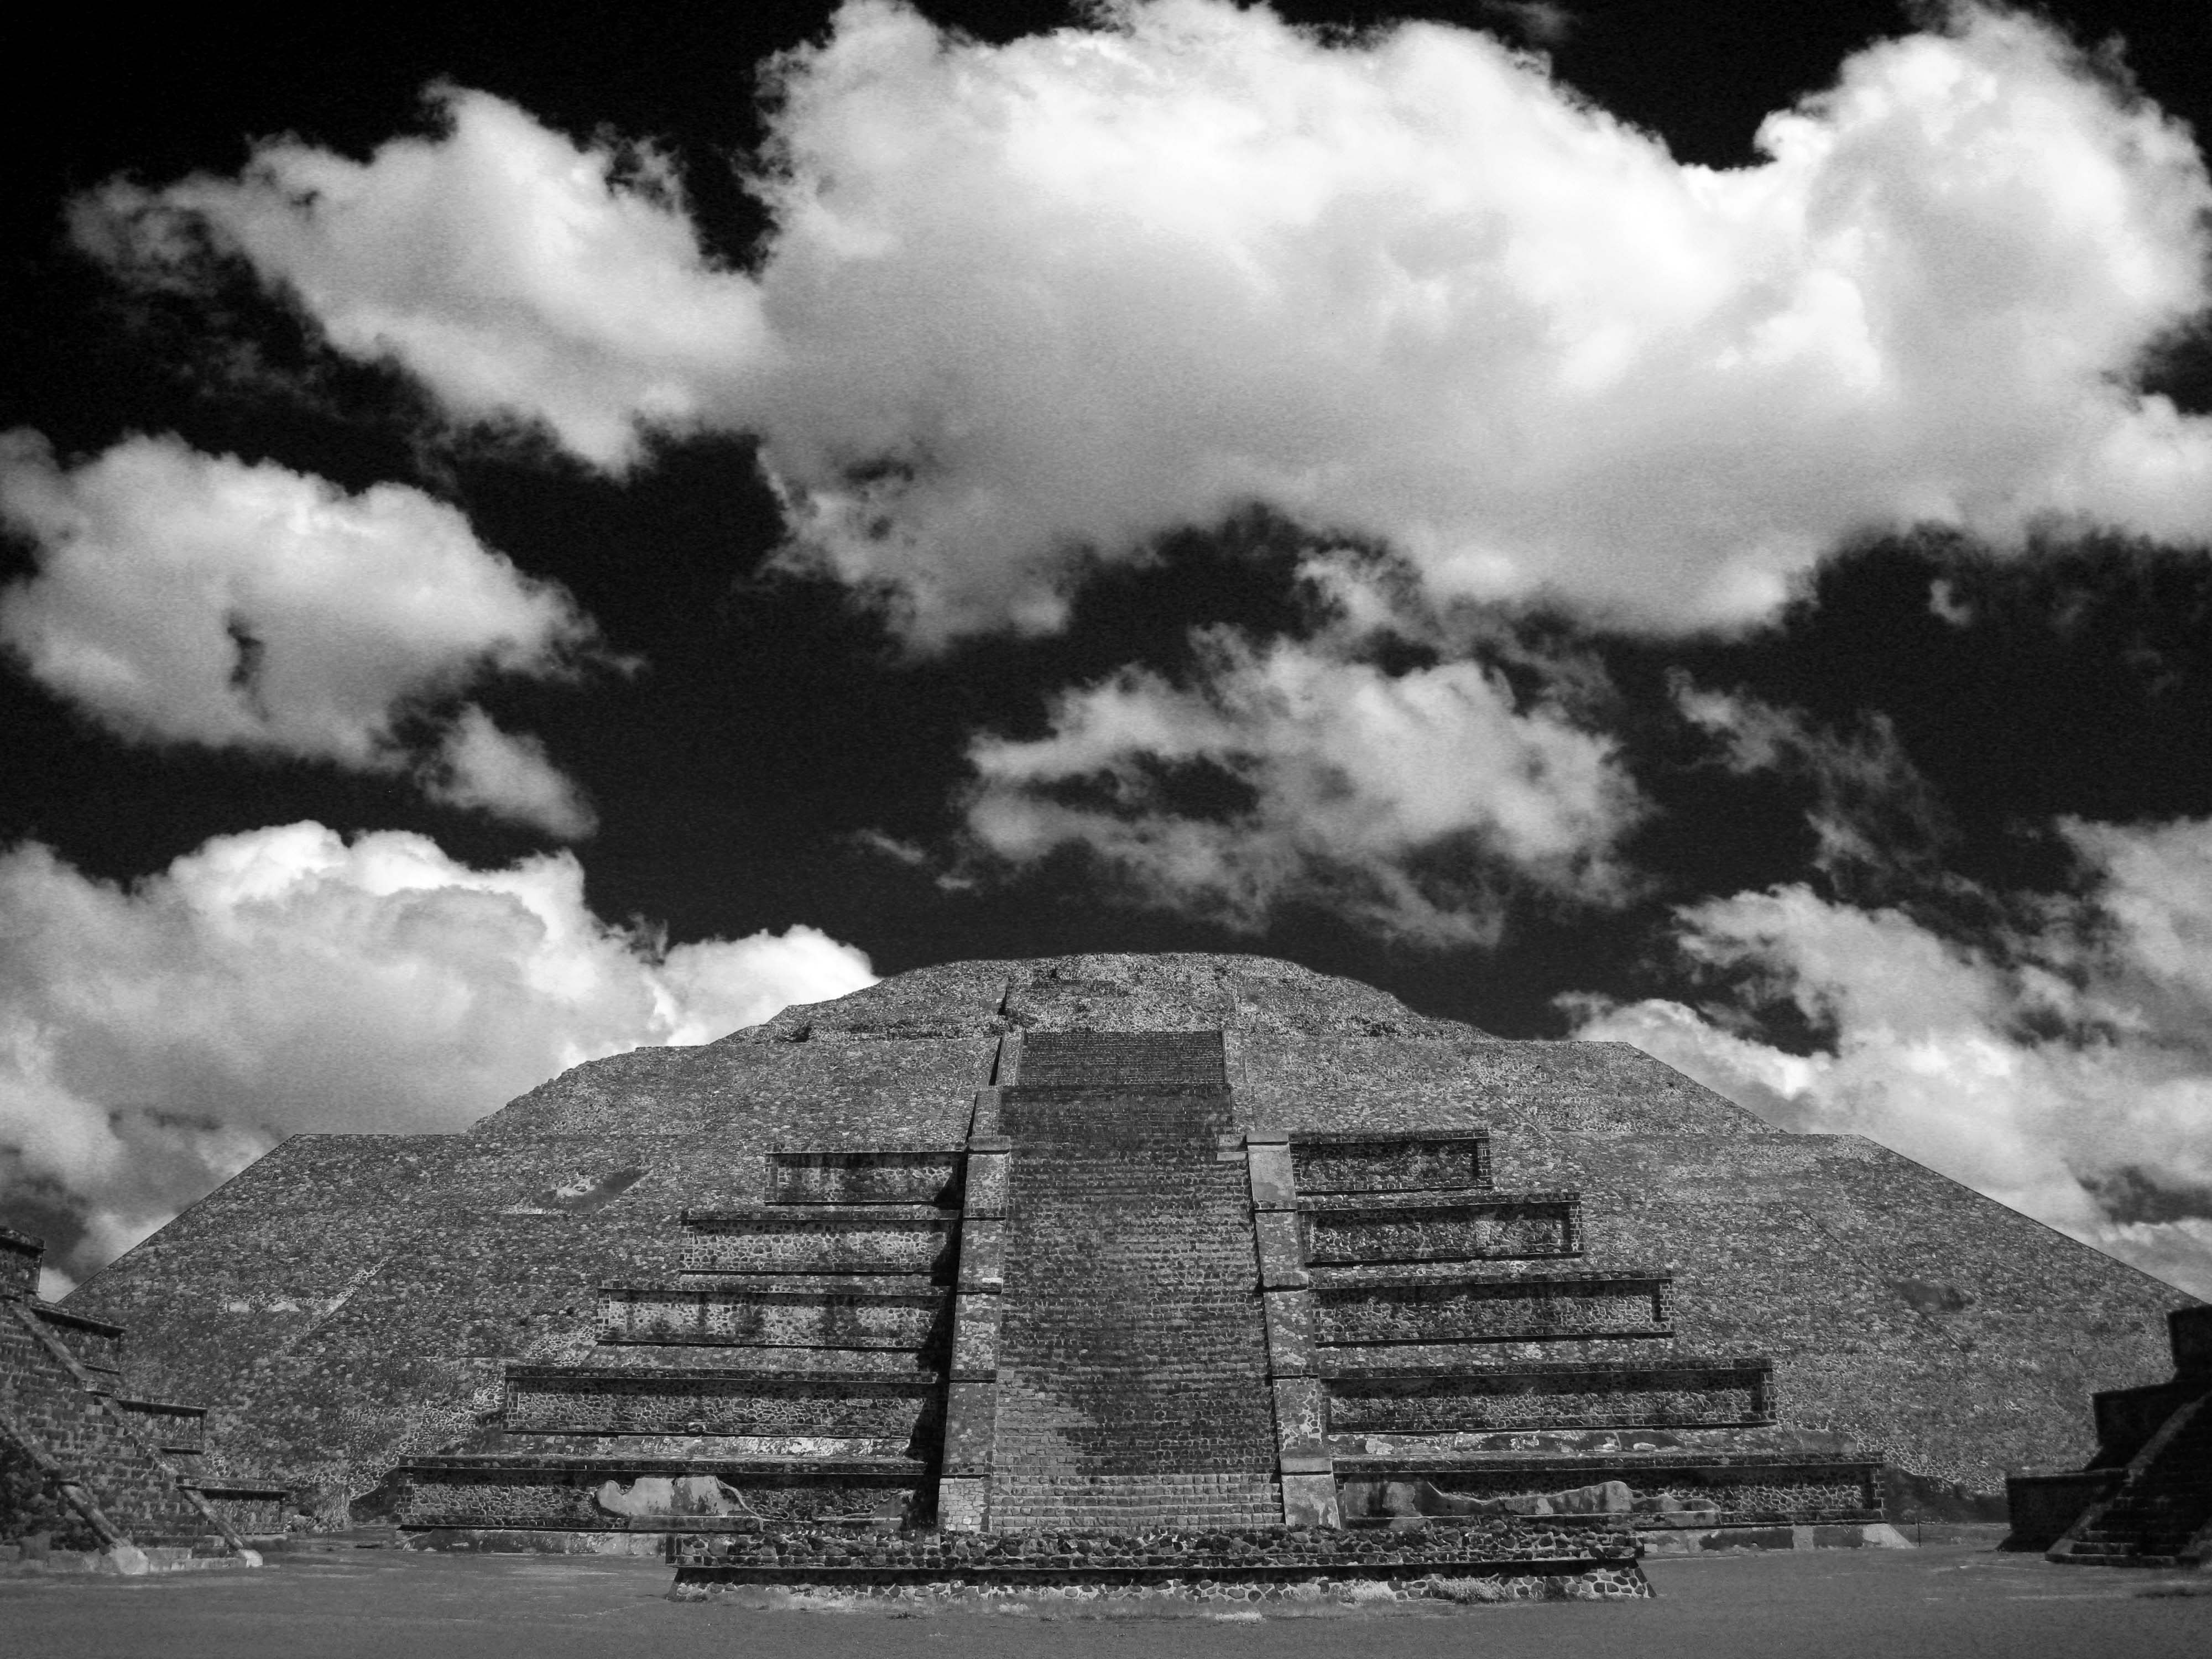 Pyramid of the Moon - Teotihuacan, Mexico - 2008